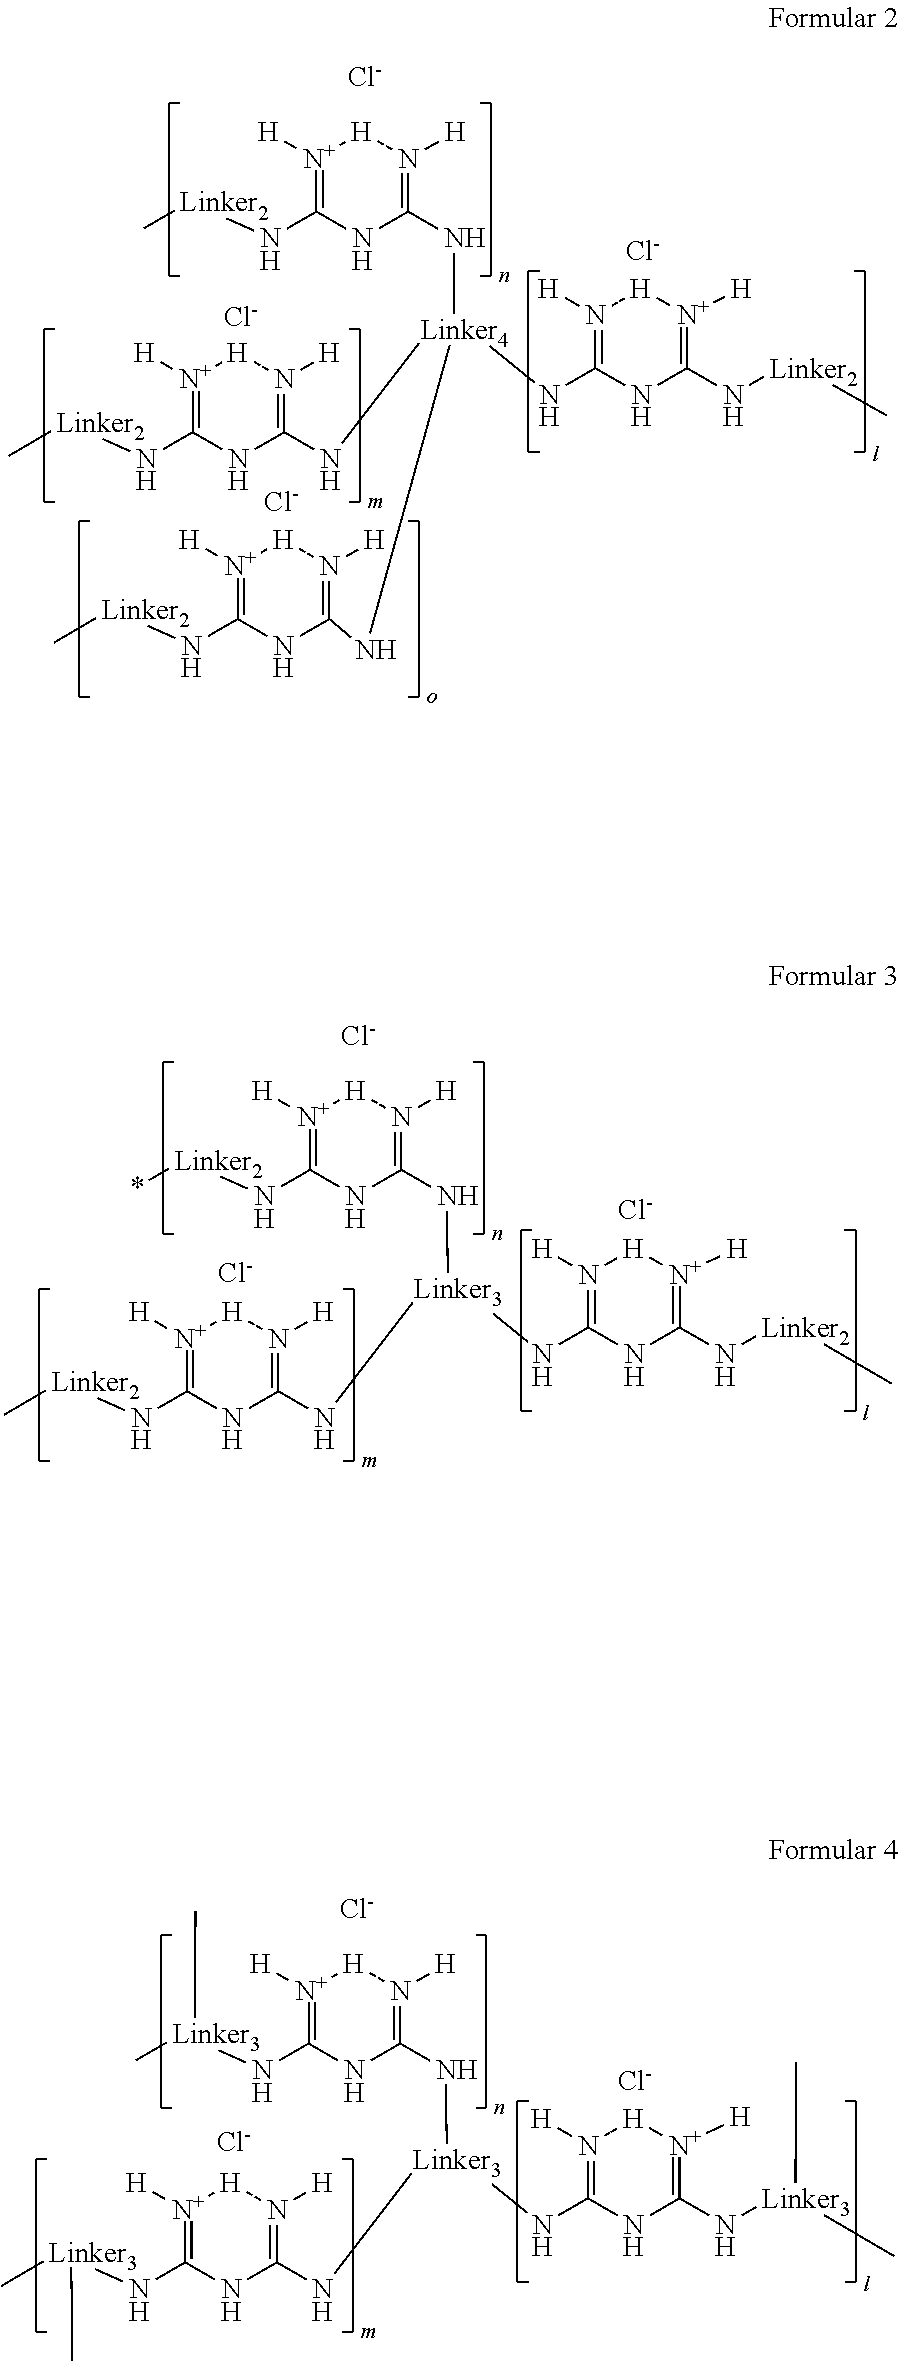 Branched polymeric biguanide compounds and their uses